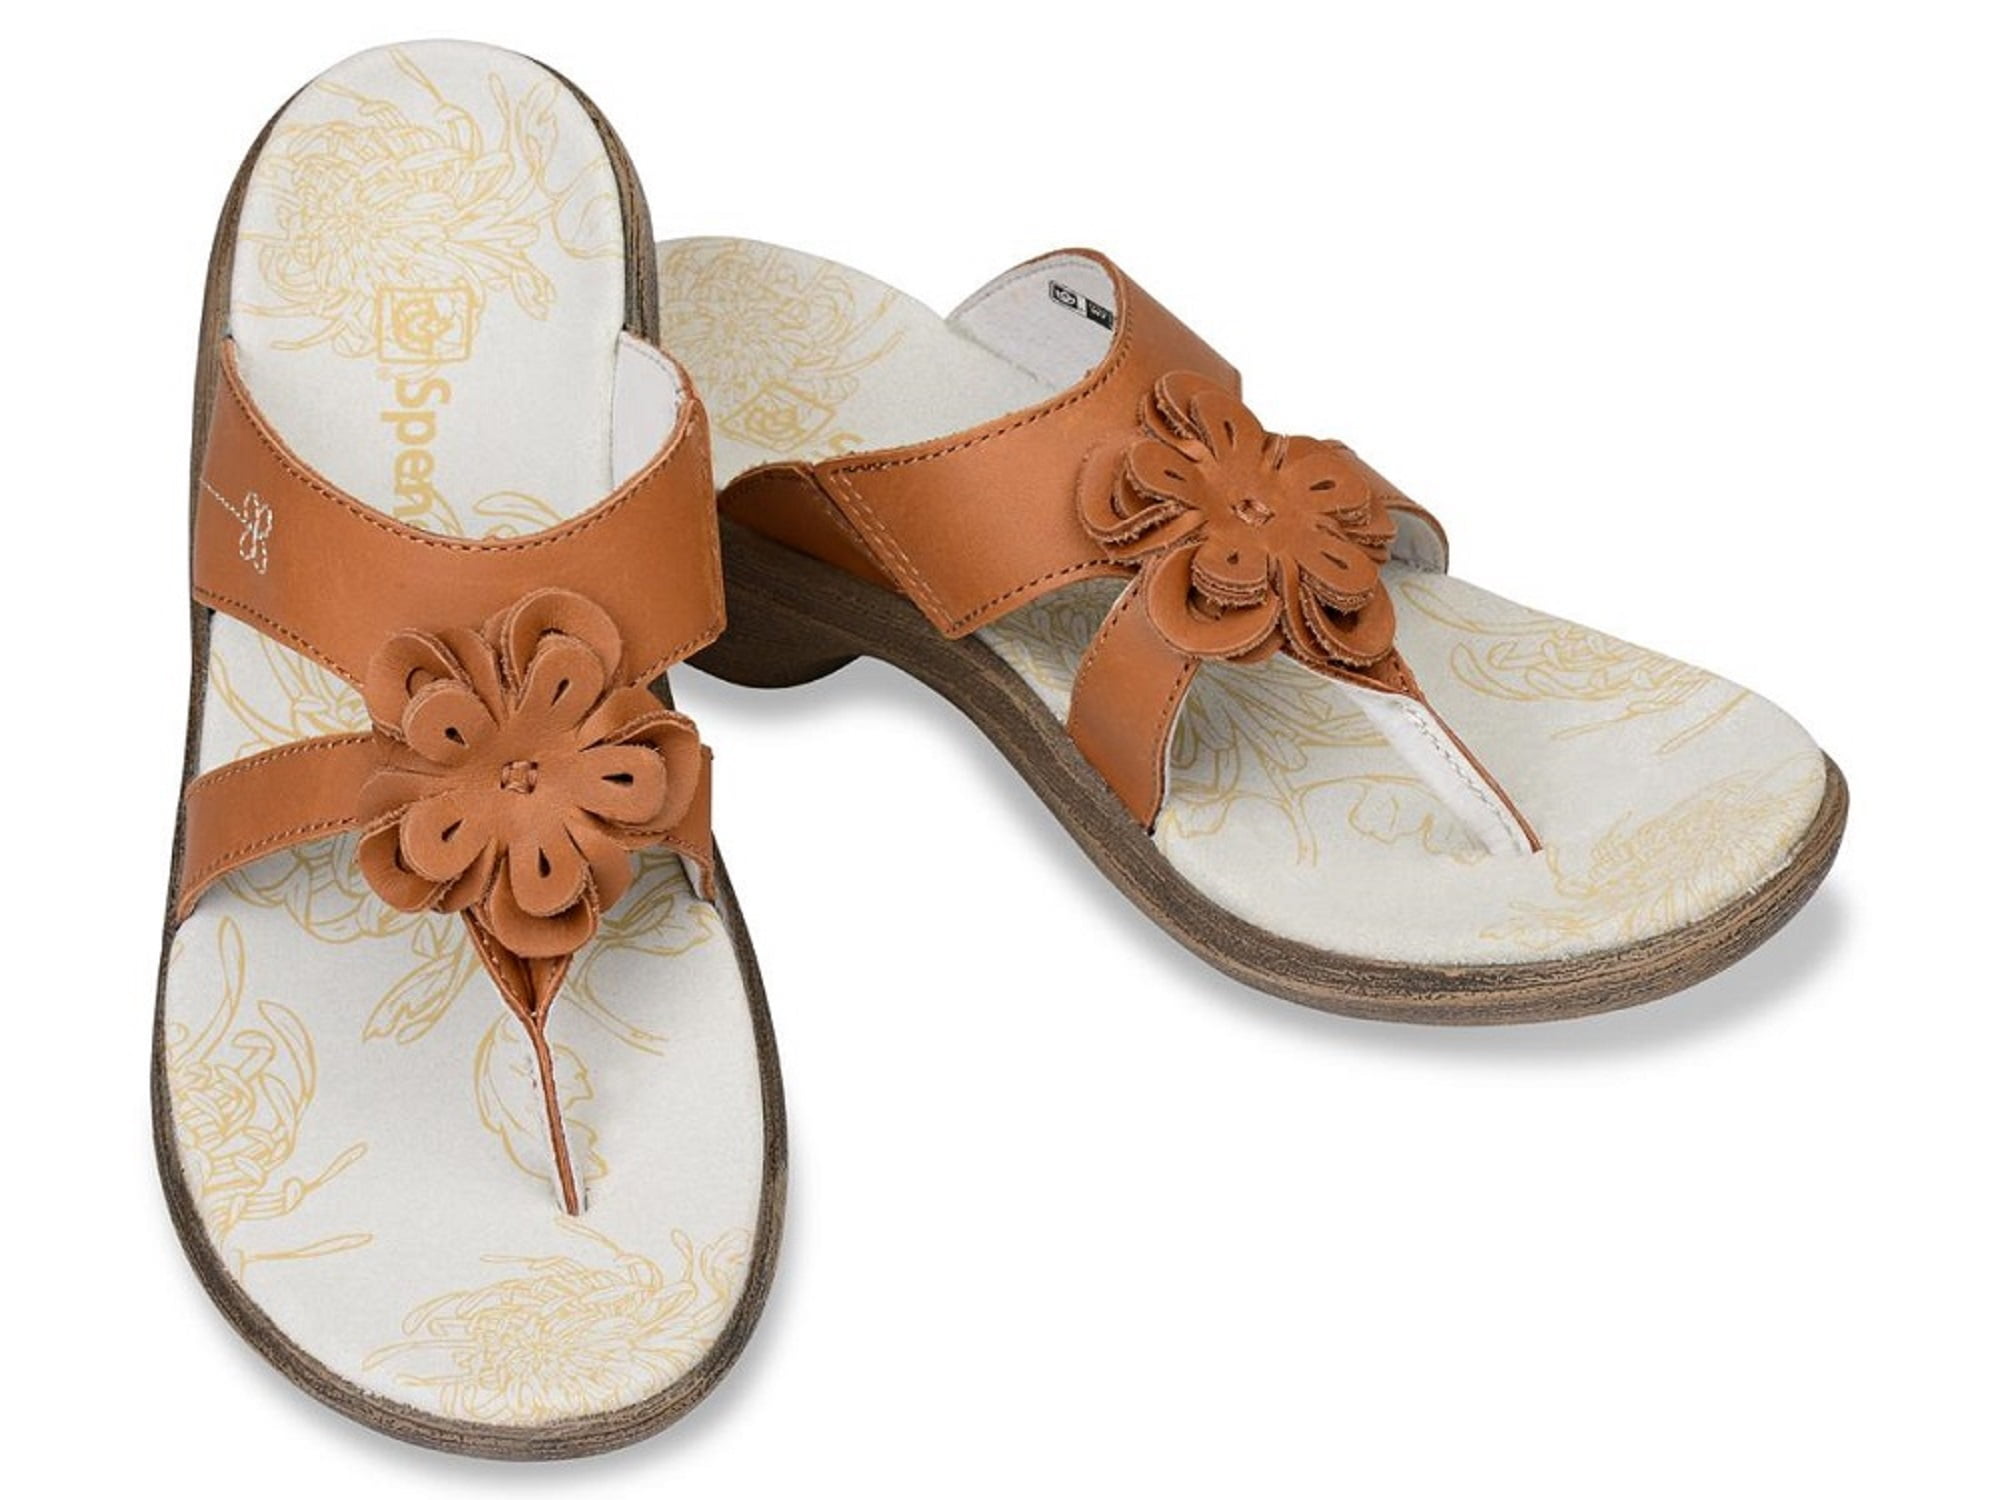 Spenco Rose - Supportive Casual Sandals - Tan Women's - Size 6 ...